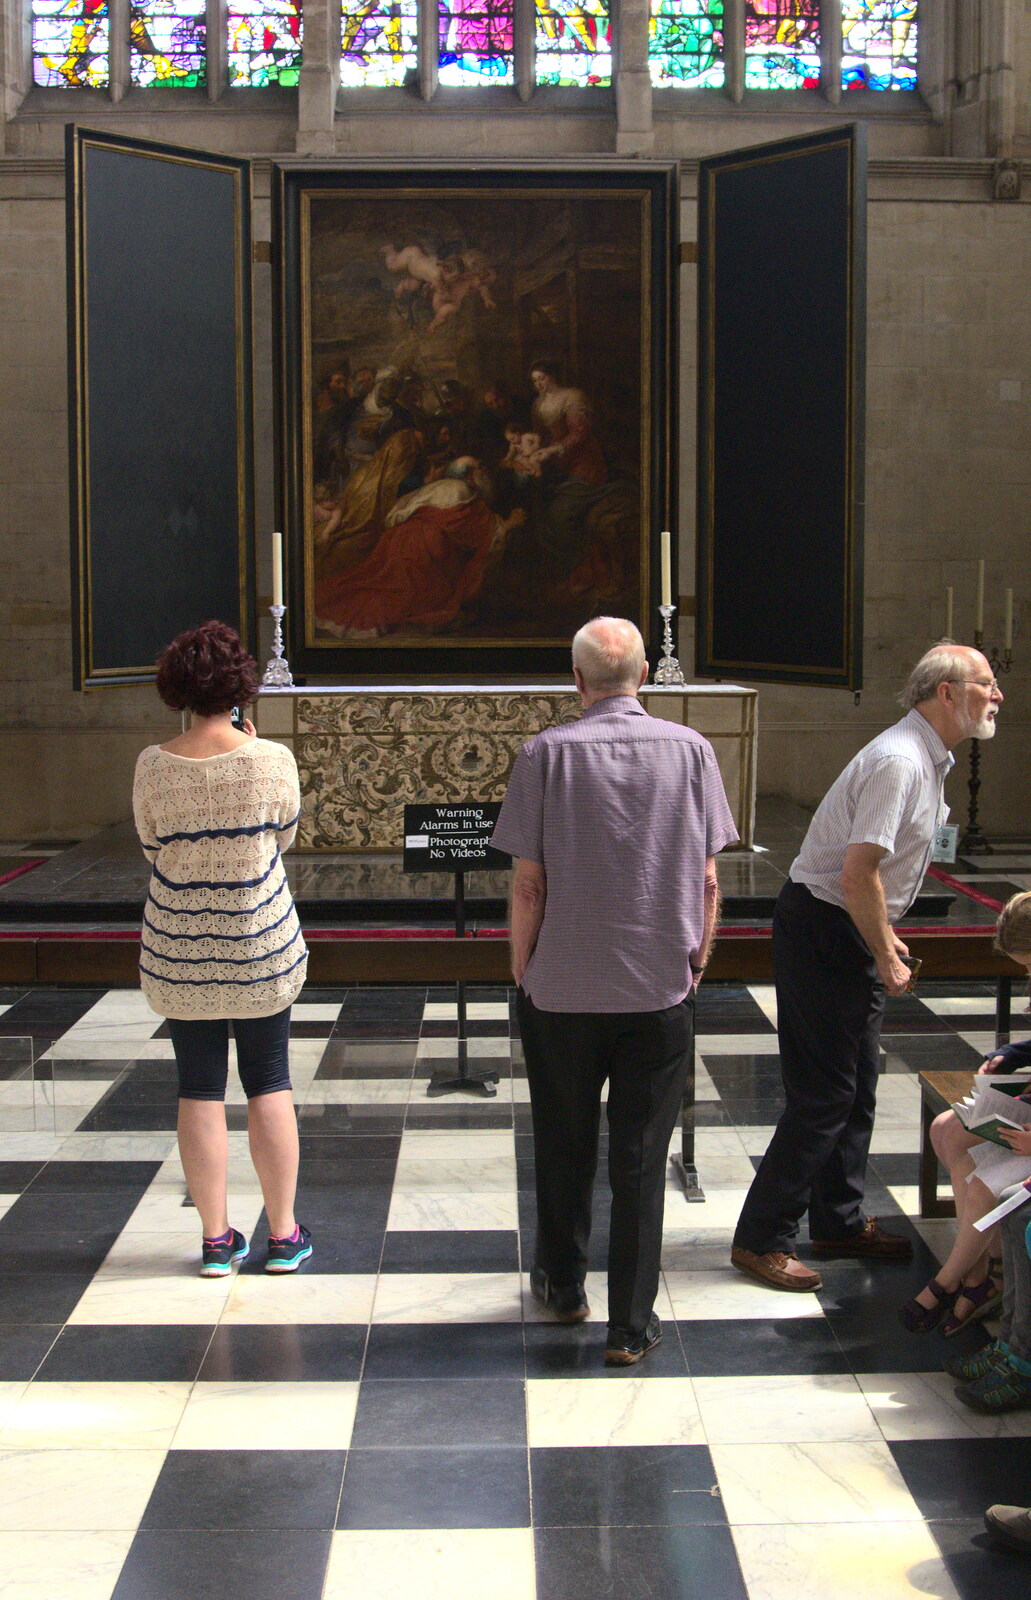 Grandad looks at a Rubens painting from Punting With Grandad, Cambridge, Cambridgeshire - 6th June 2015